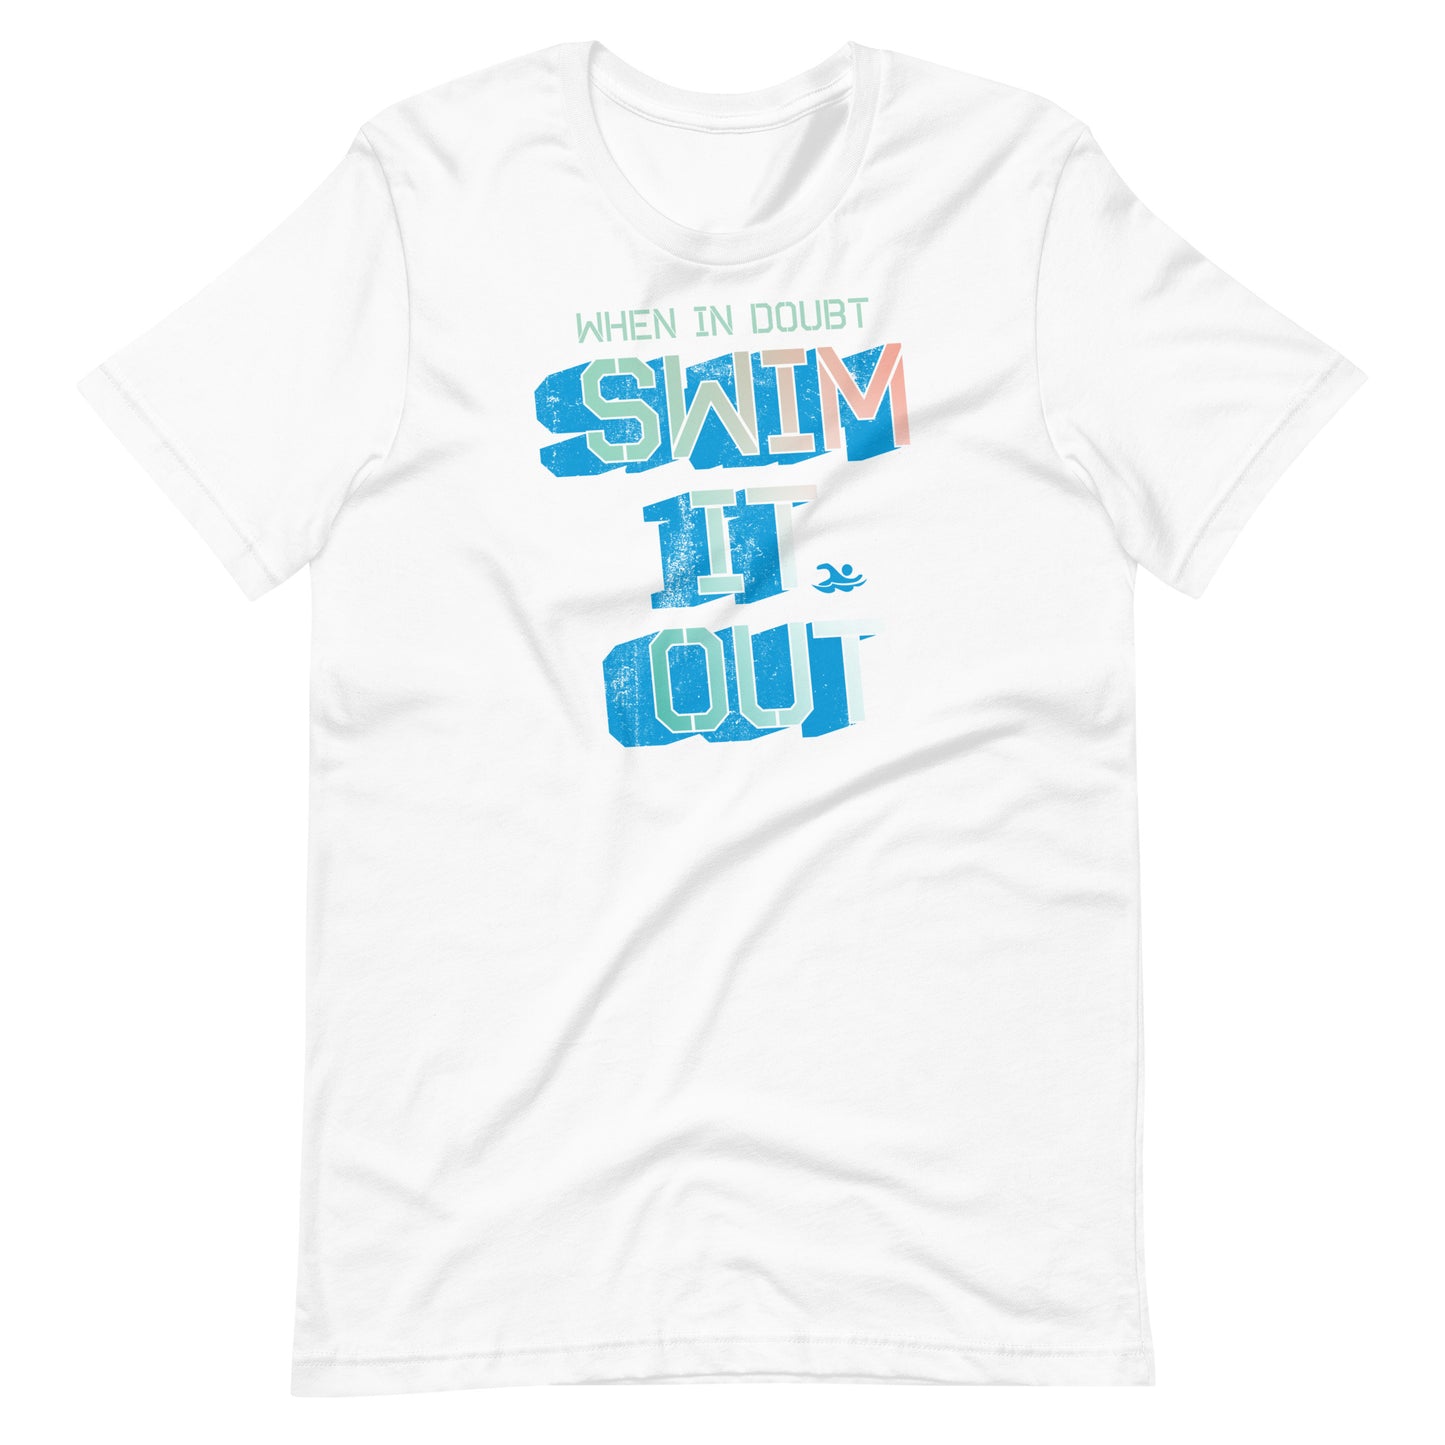 When In Doubt Swim It Out Swimmer T Shirt